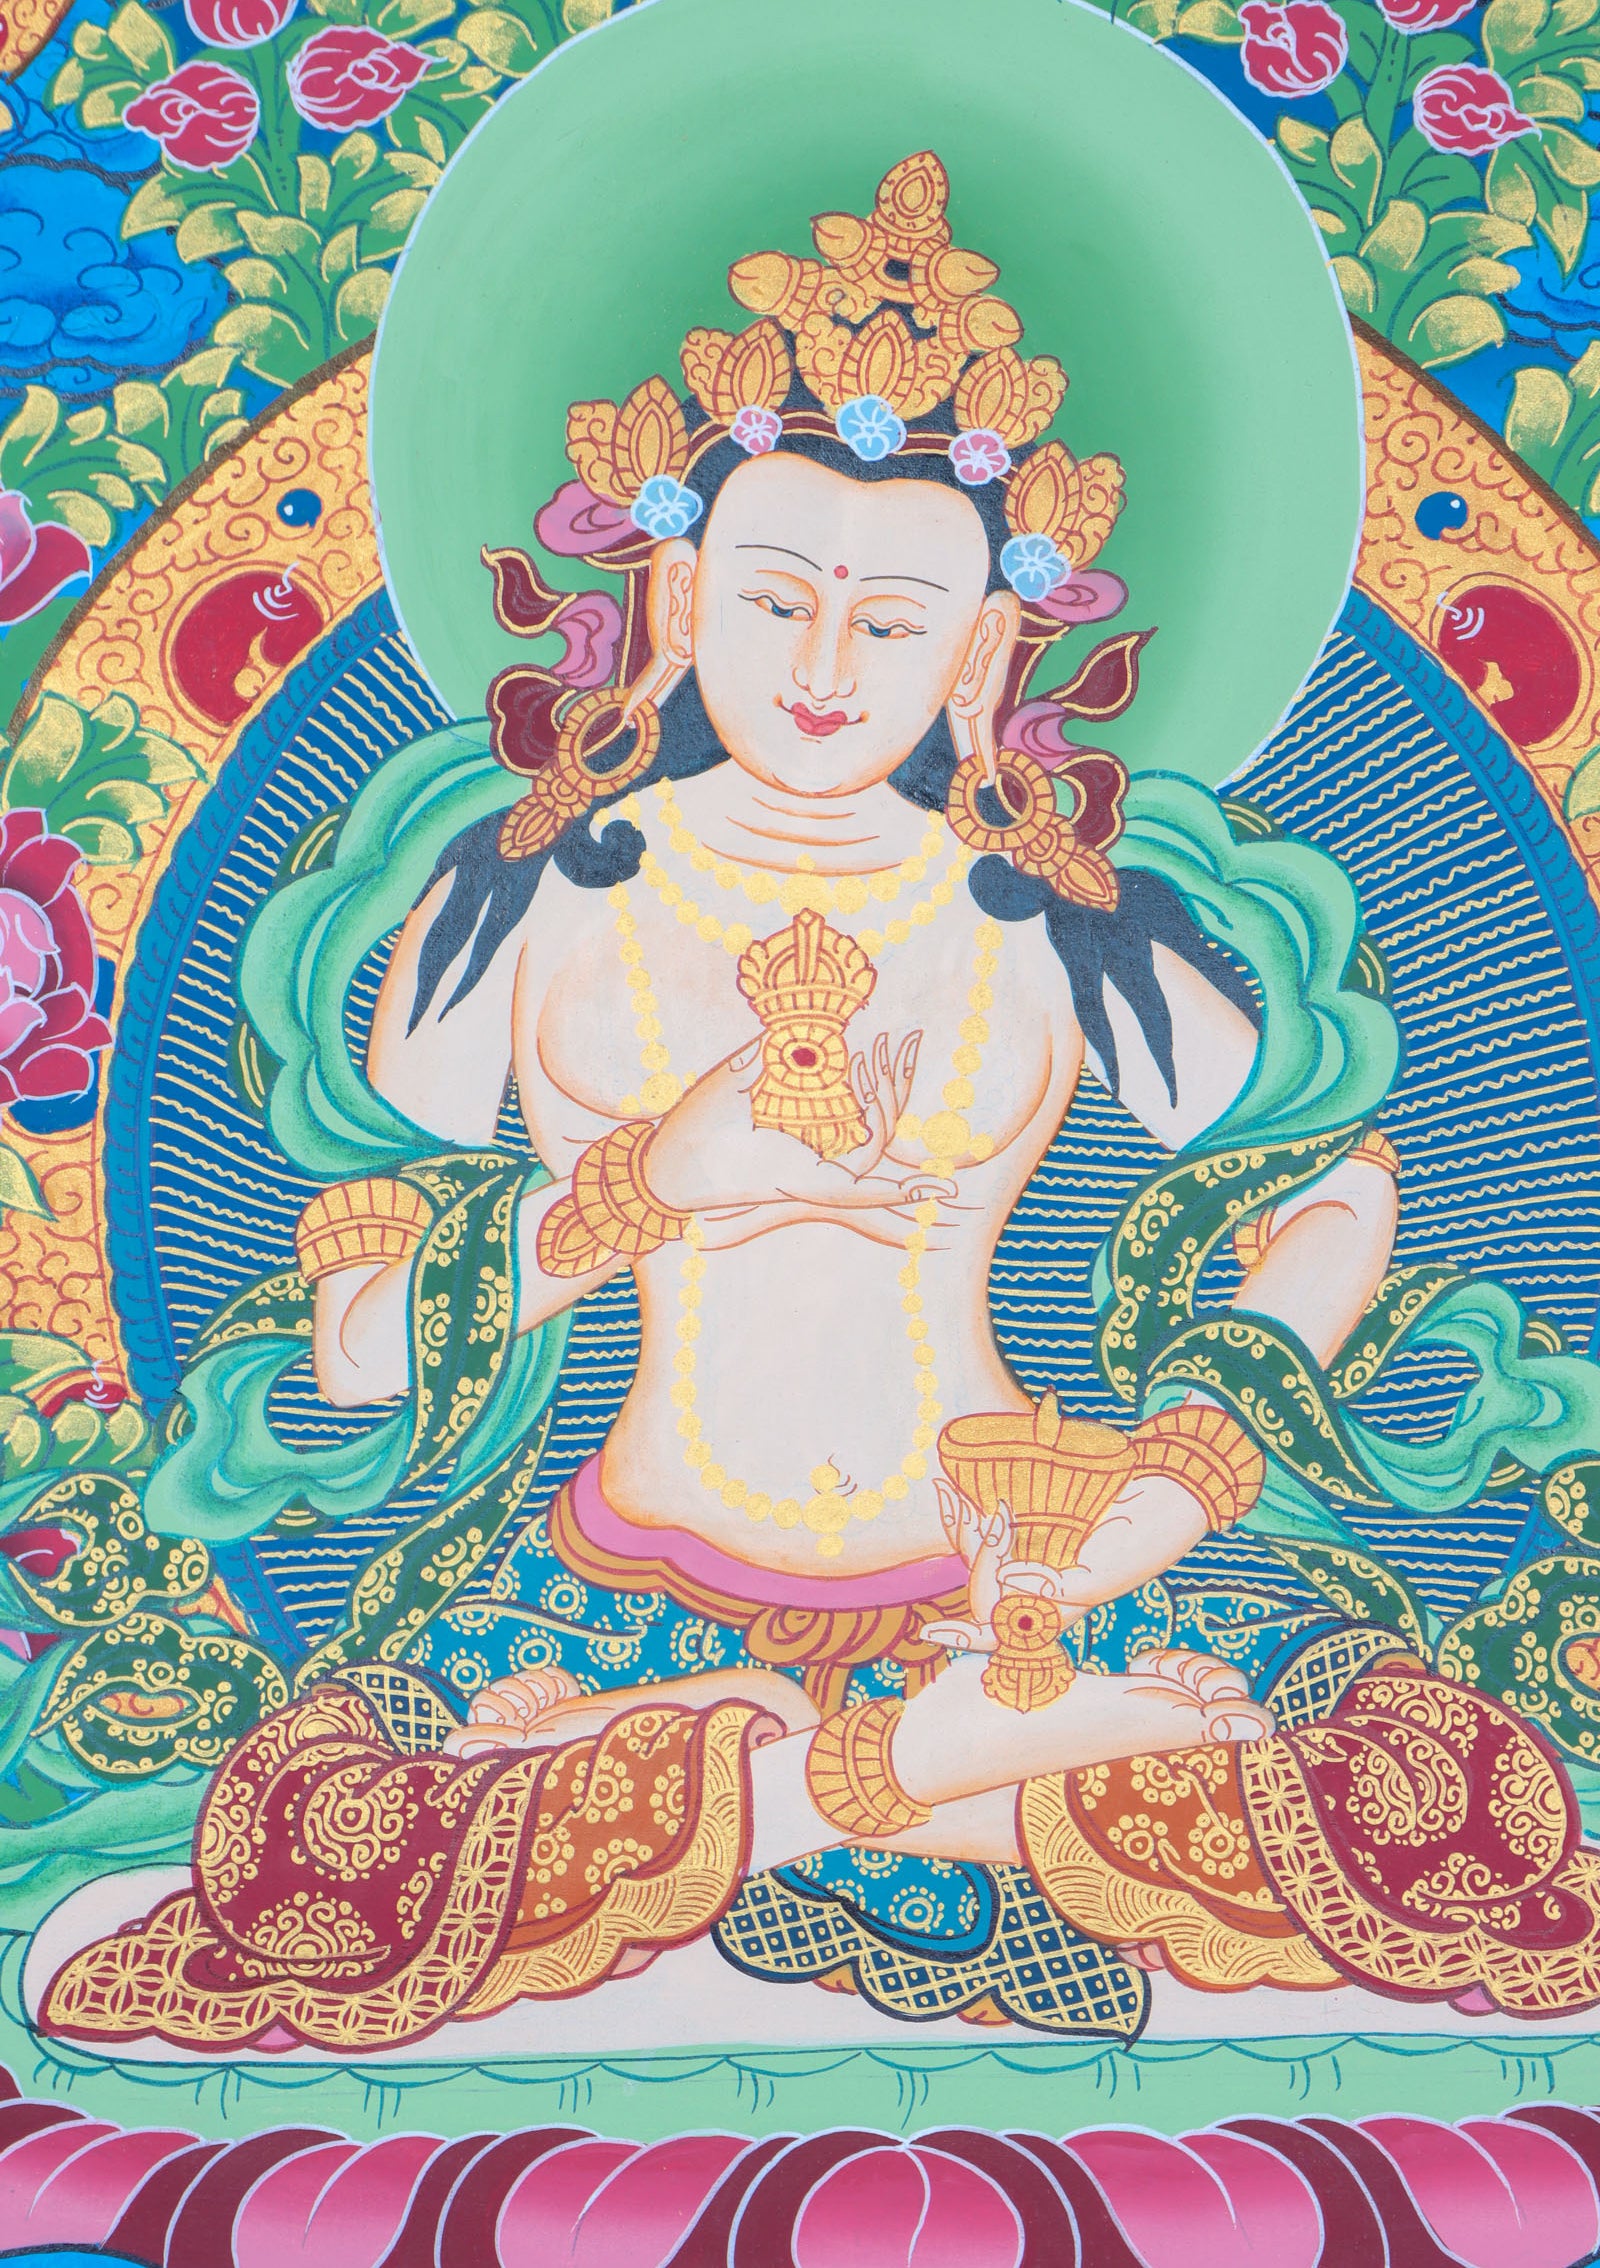 Bajrasattva Thangka for healing of emotional wounds, purifying the mind, and bringing about positive changes in one's life.